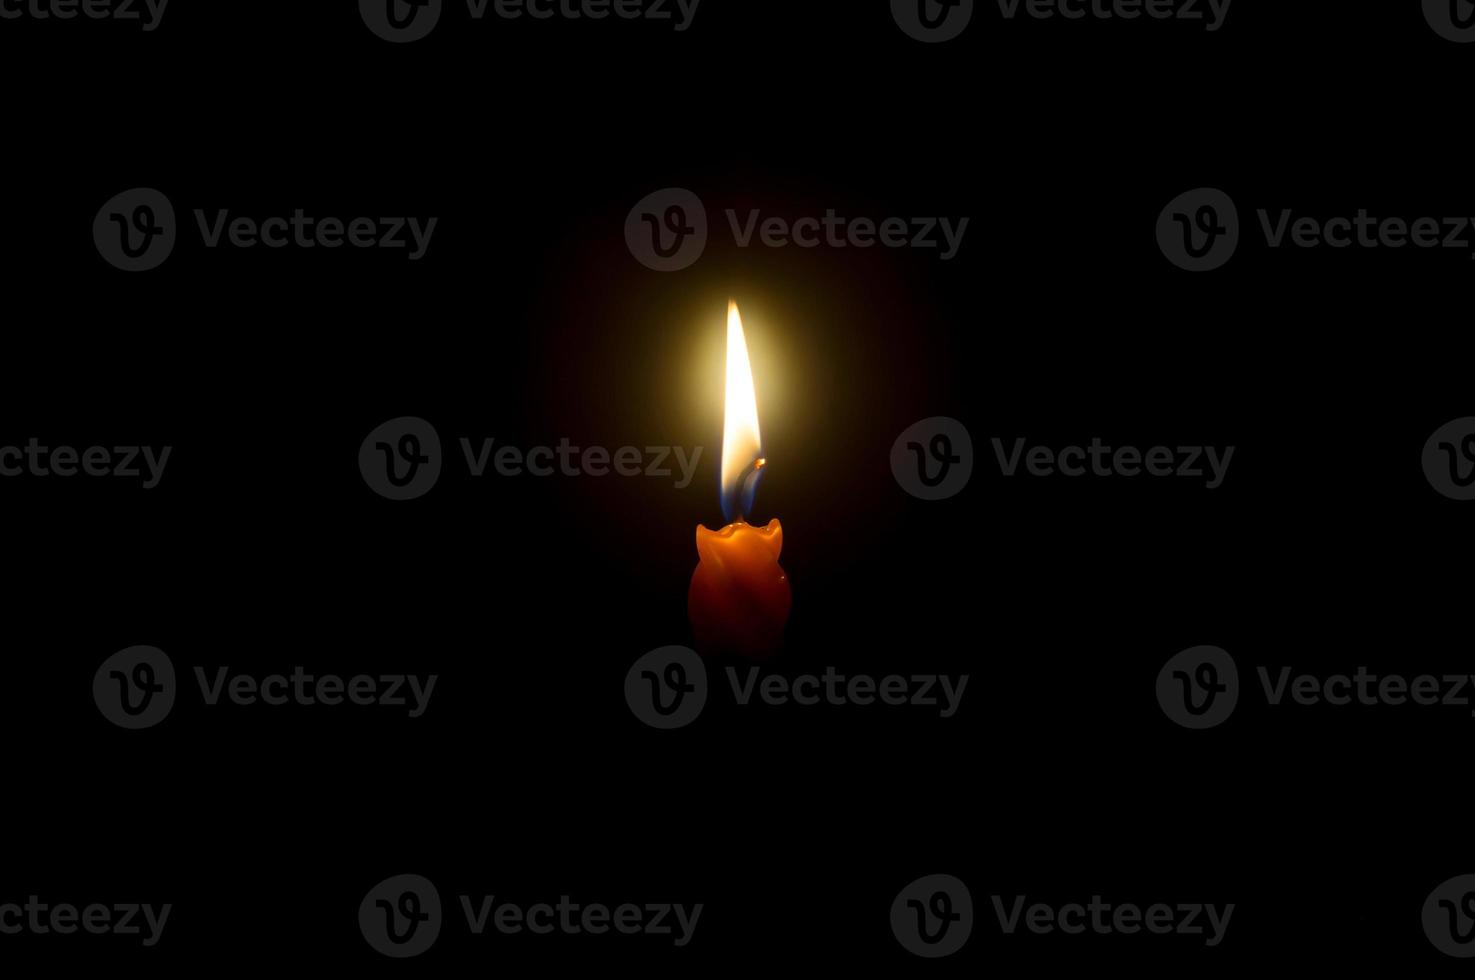 A single burning candle flame or light glowing on a spiral orange cand photo